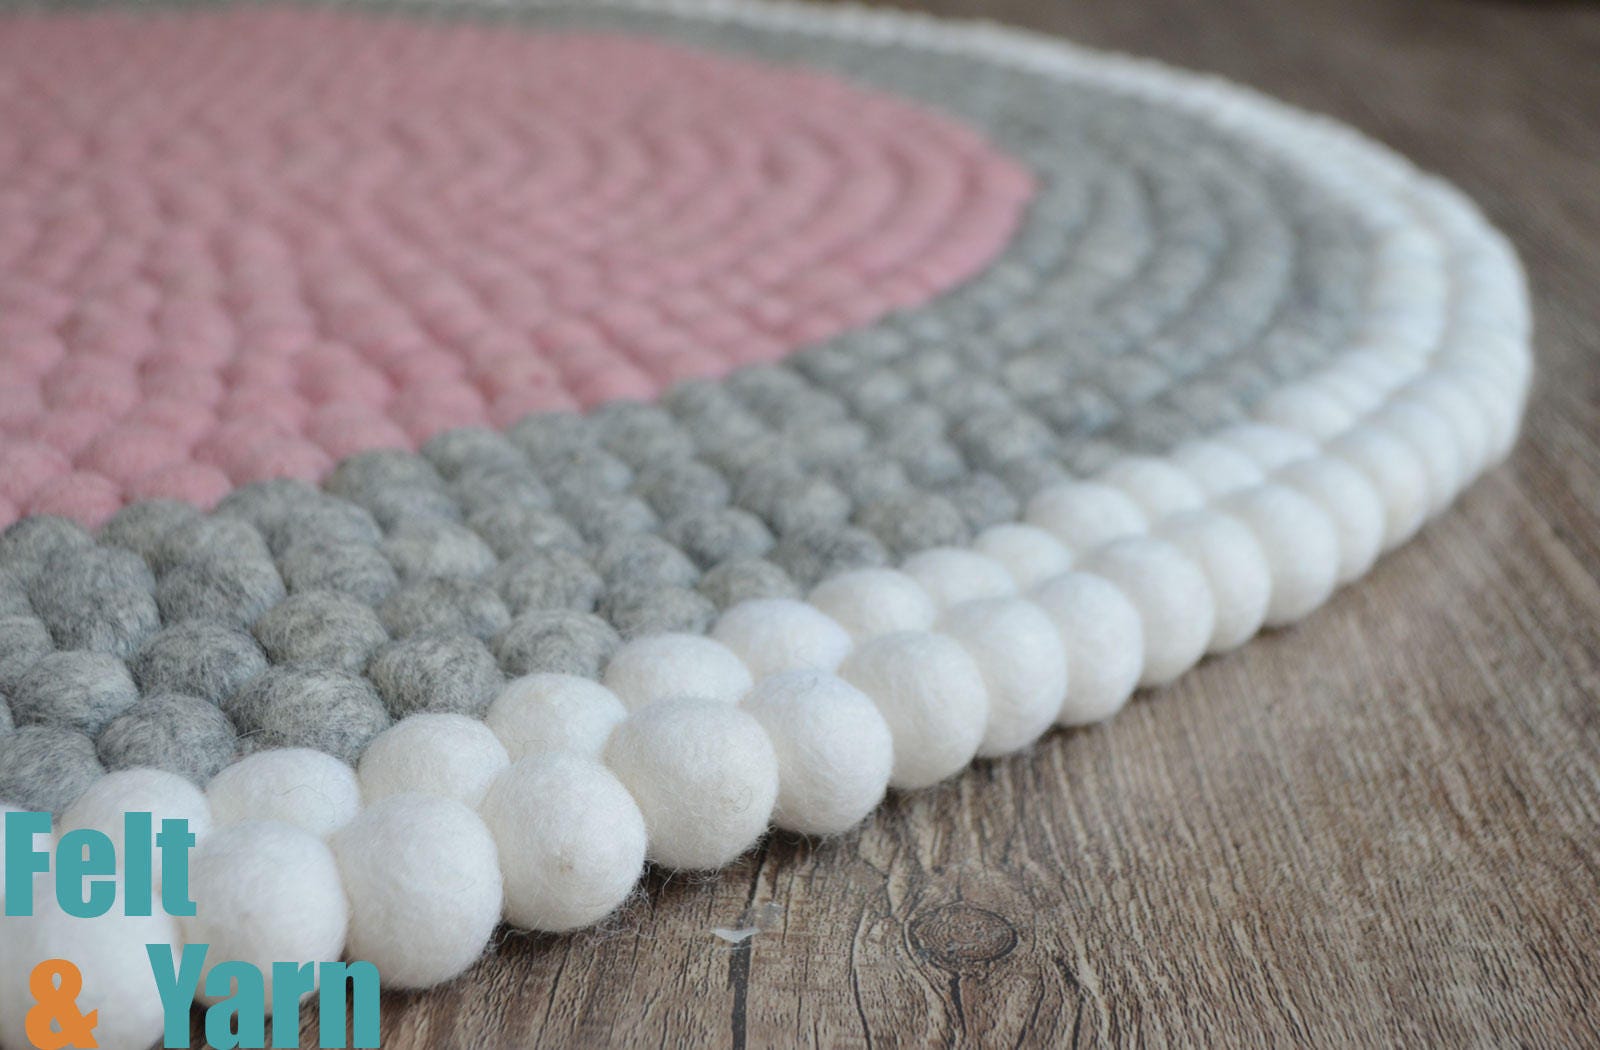 Pink Grey & White Wool Felt Ball Rug Carpet Room Decor Round Mats & Strats From 40cm Fair Trade Ethically Handmade Using Natural